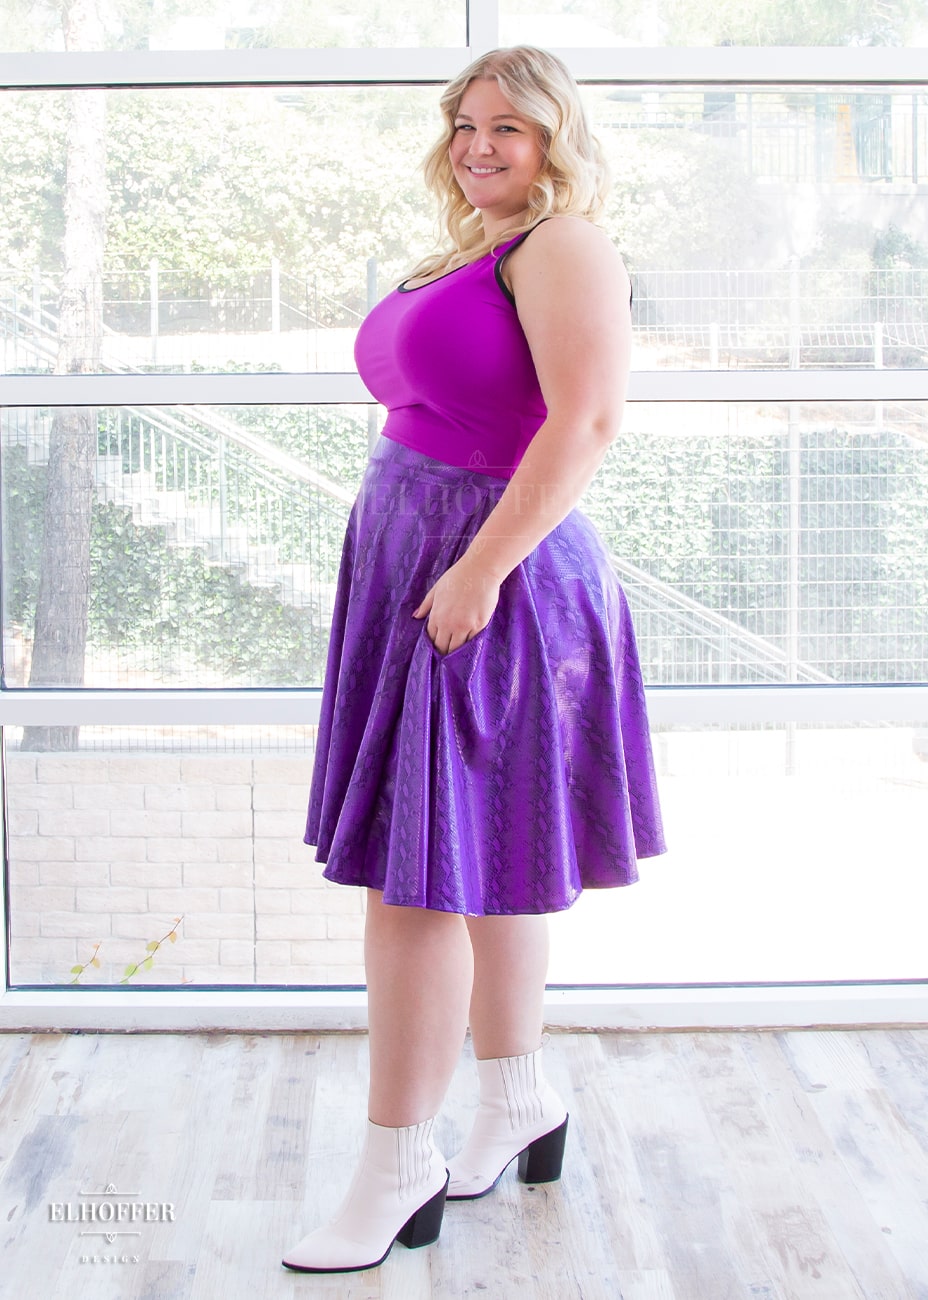 Sarah, a fair skinned size XL model with long blonde hair, wears a high-waisted knee length full skirt with a fitted matching waistband encased with elastic in our purple croki print. The purple croki print is a bright purple shiny snake skin pattern with vertical stripes. She is standing to the side with her hand in one of the generous pockets.